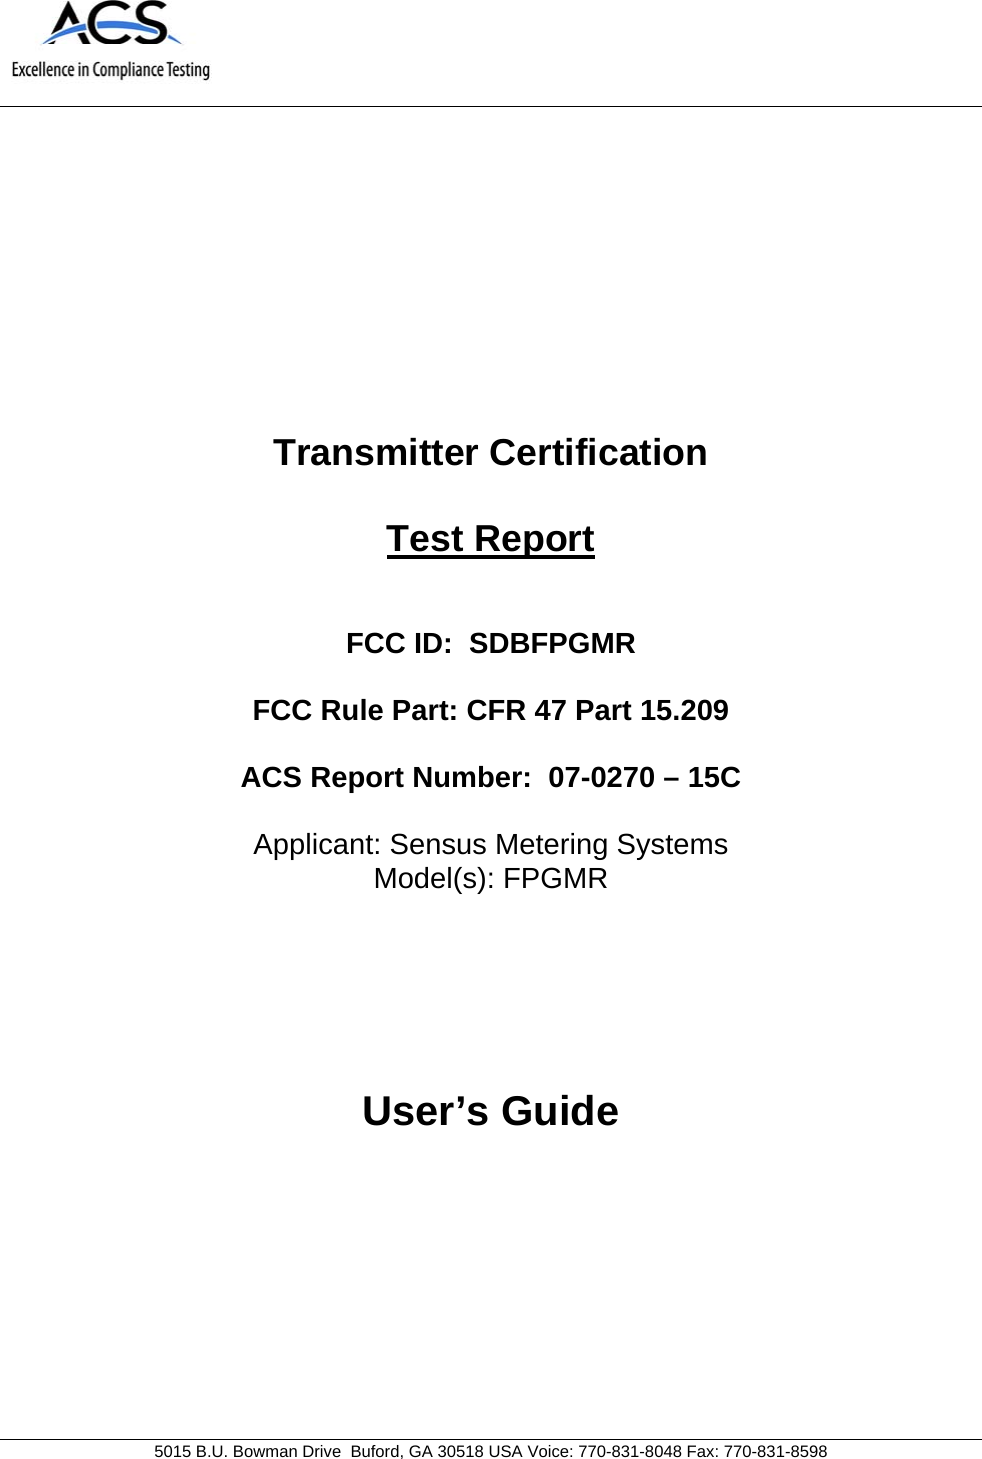                               5015 B.U. Bowman Drive  Buford, GA 30518 USA Voice: 770-831-8048 Fax: 770-831-8598   Transmitter Certification  Test Report   FCC ID:  SDBFPGMR  FCC Rule Part: CFR 47 Part 15.209  ACS Report Number:  07-0270 – 15C   Applicant: Sensus Metering Systems Model(s): FPGMR     User’s Guide 